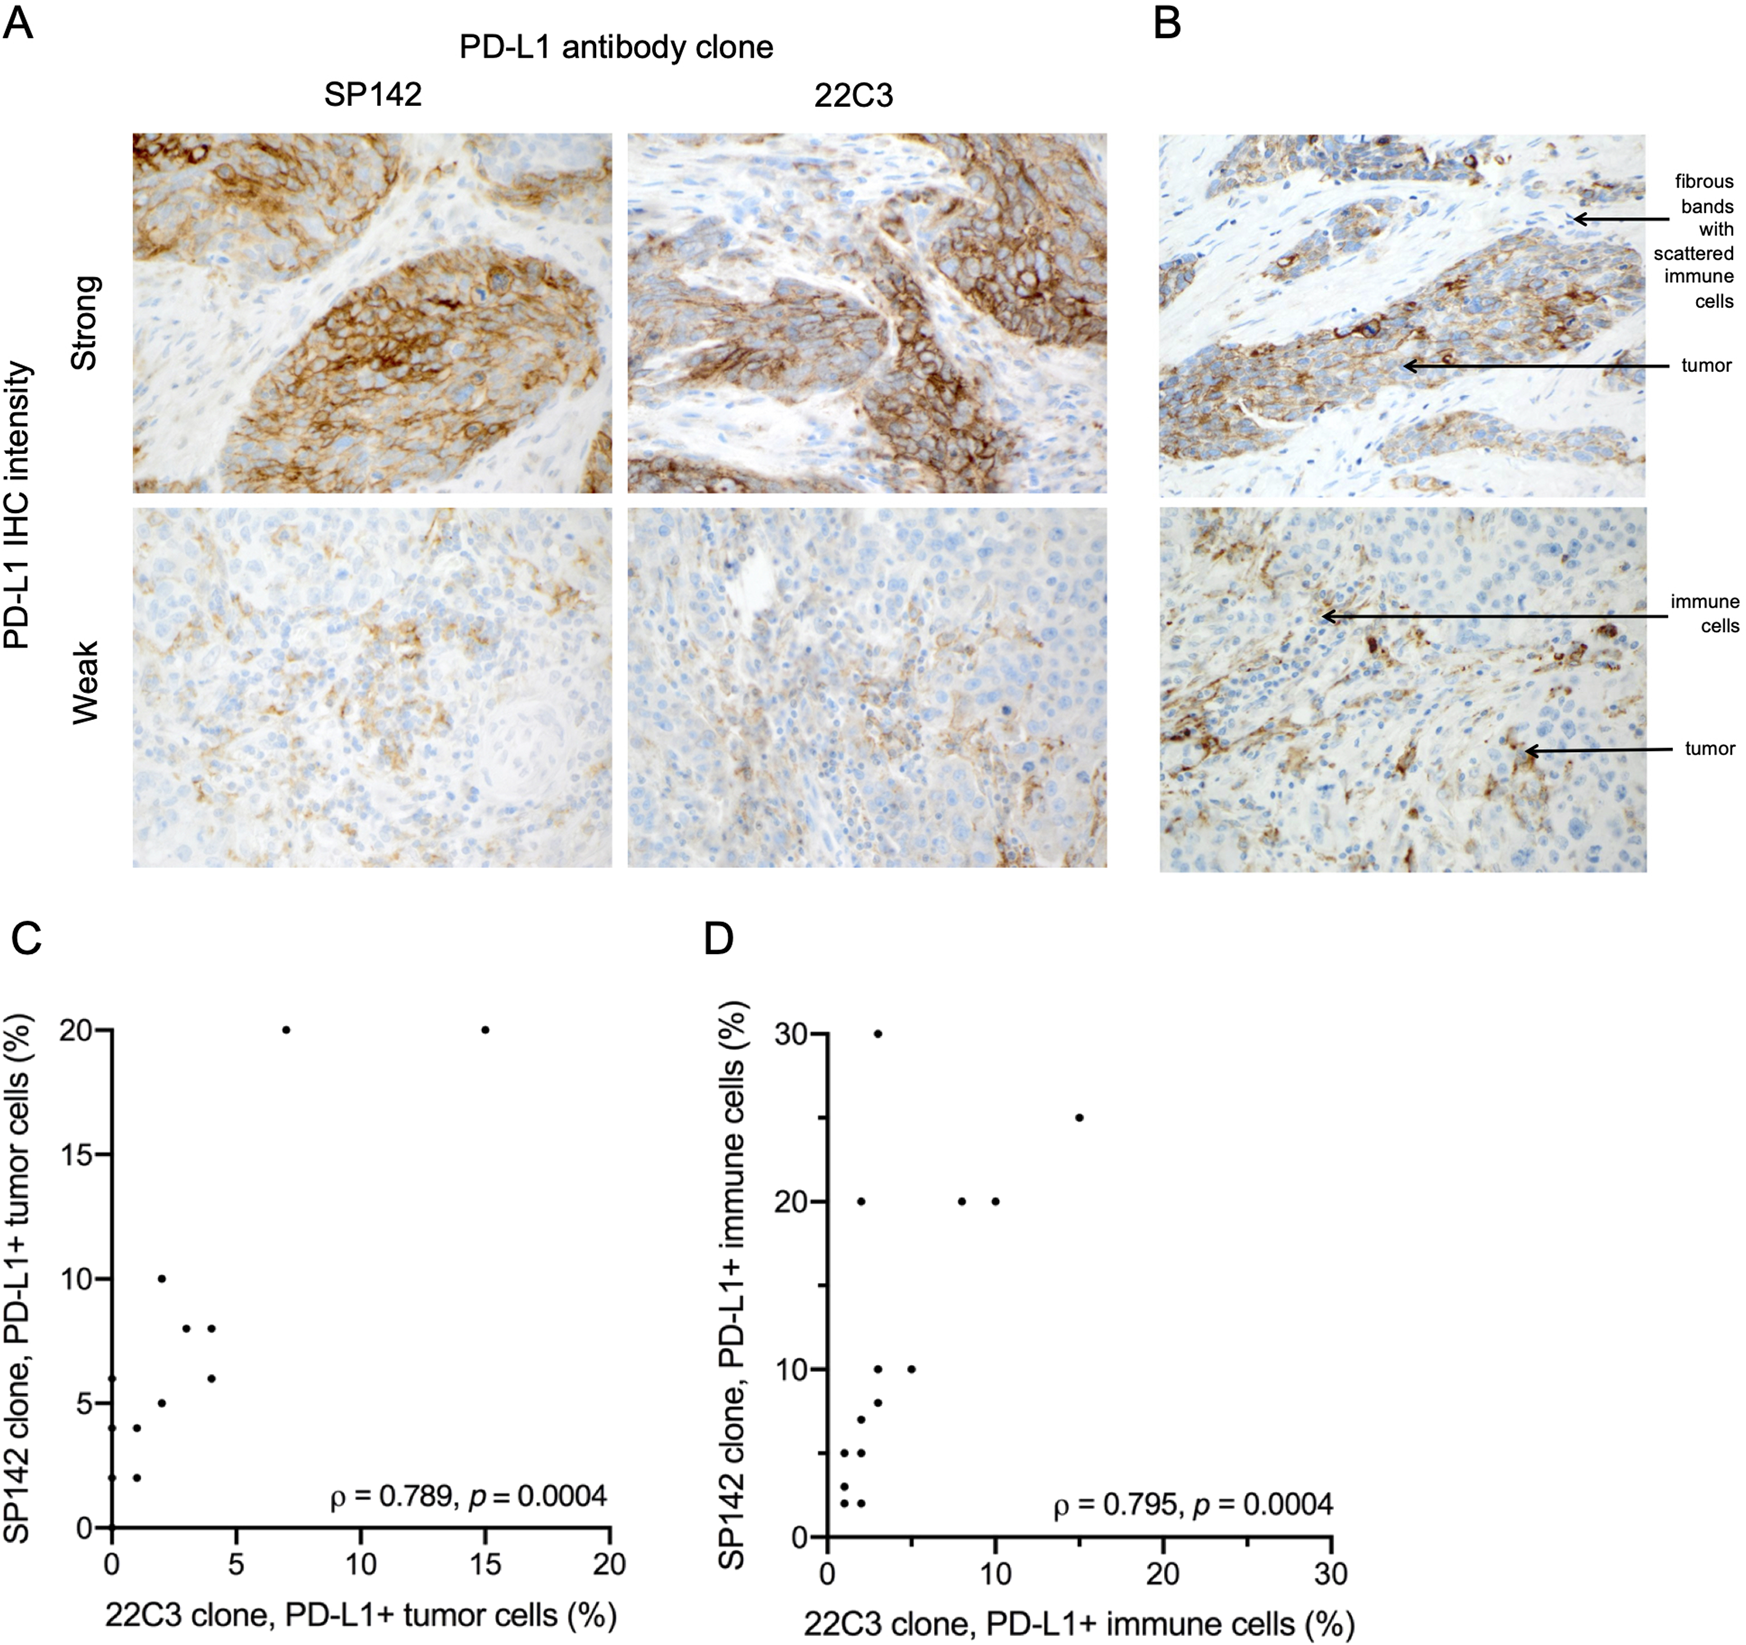 Association of PD-L1 expression by immunohistochemistry and gene microarray  with molecular subtypes of ovarian tumors | Modern Pathology